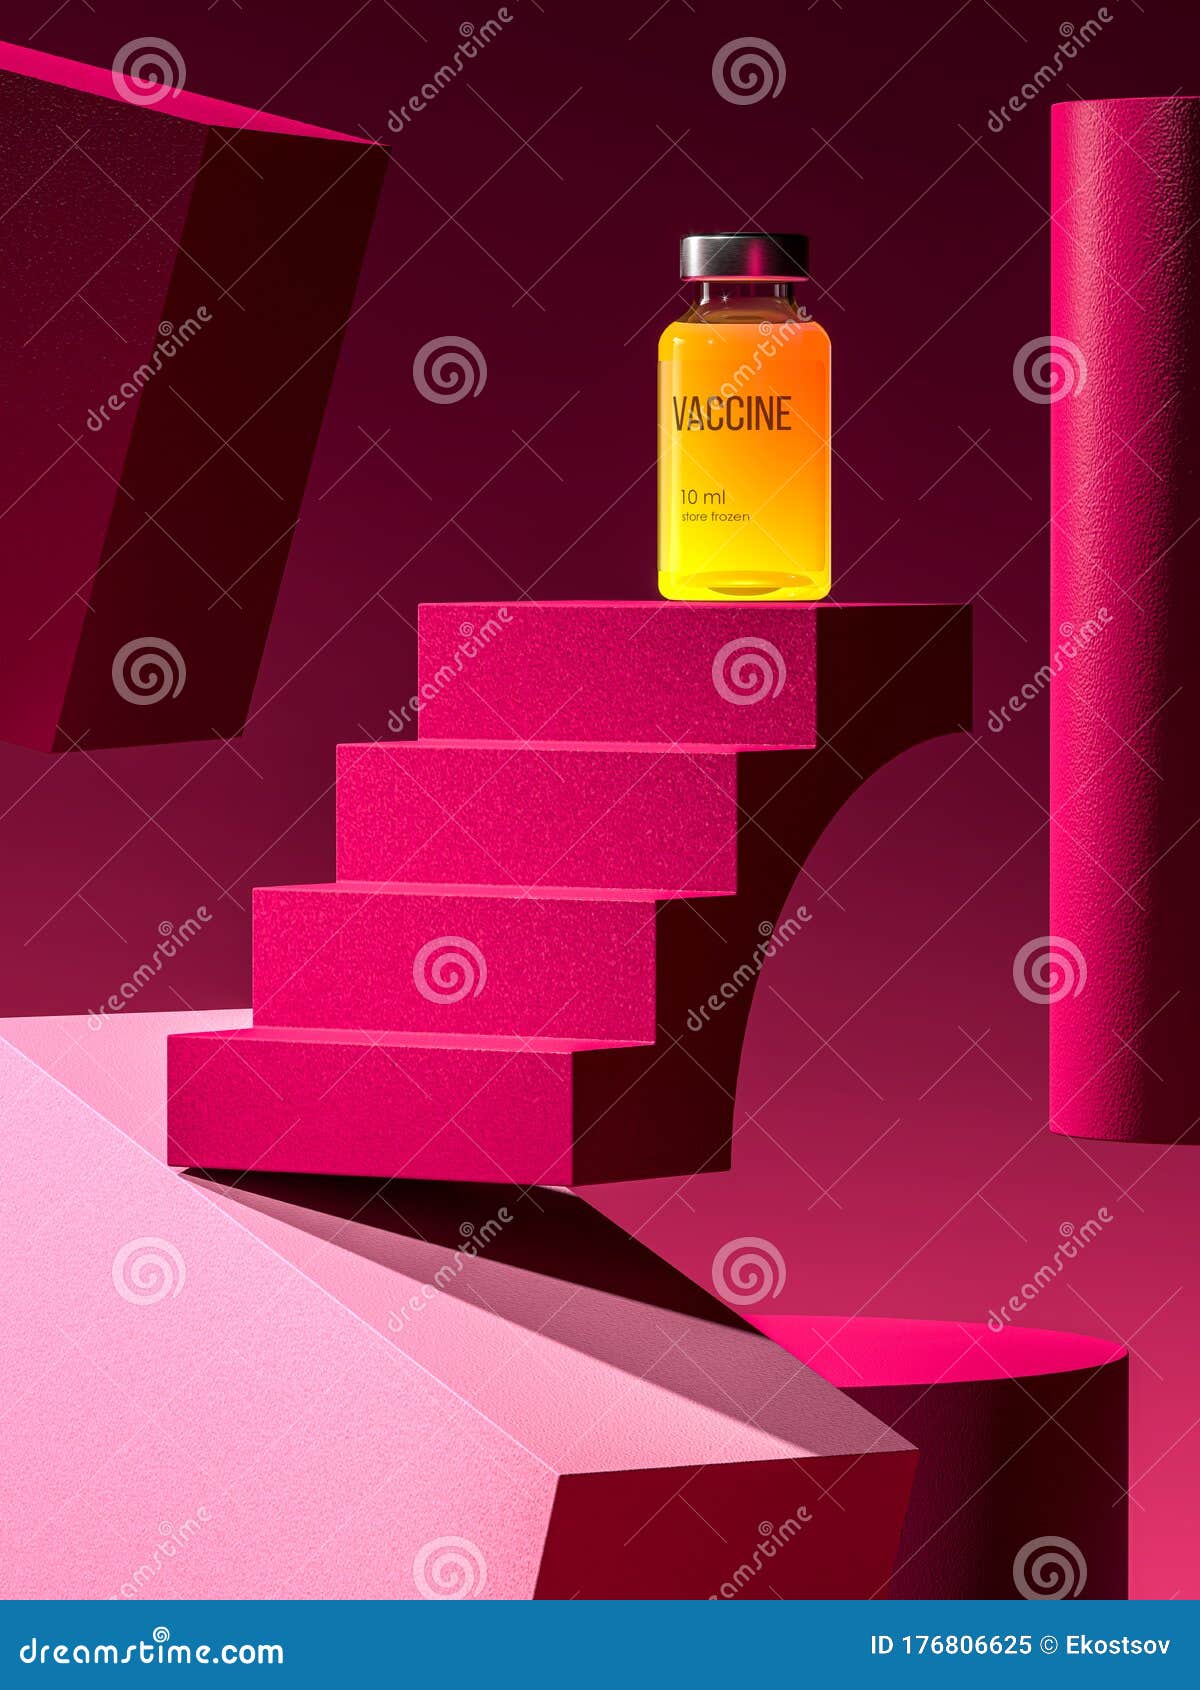 bottle for injection with orange content from sars coronavirus on ladder showcase and abstract background. 3d rendering